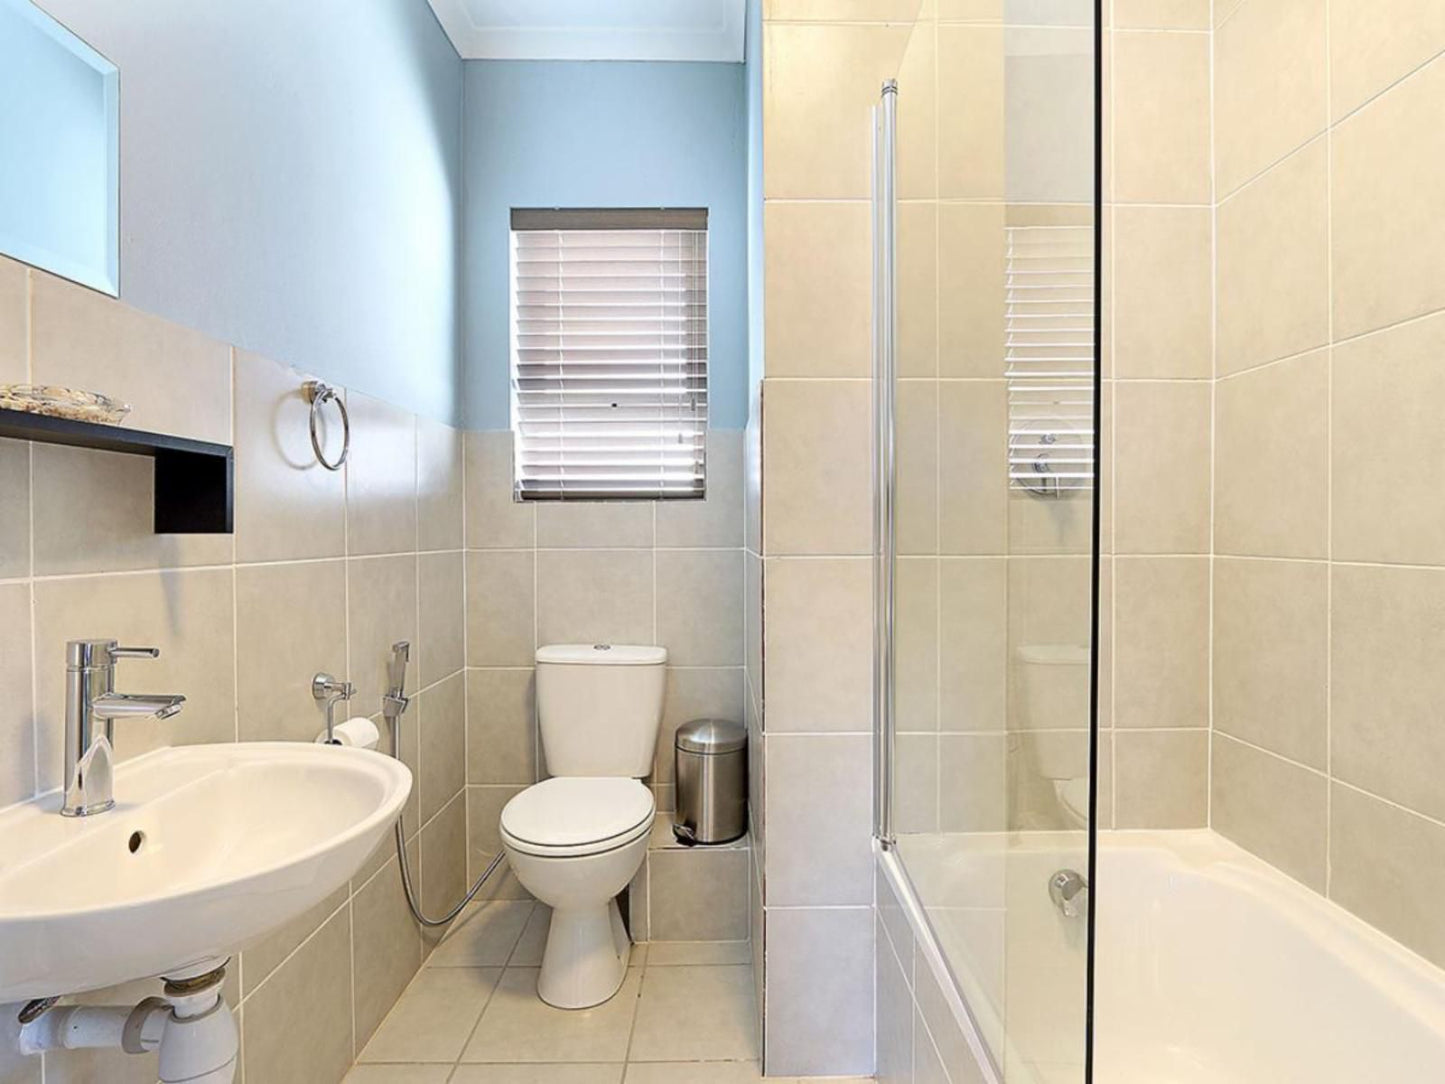 Ocean Breeze 59 By Hostagents Muizenberg Cape Town Western Cape South Africa Bathroom